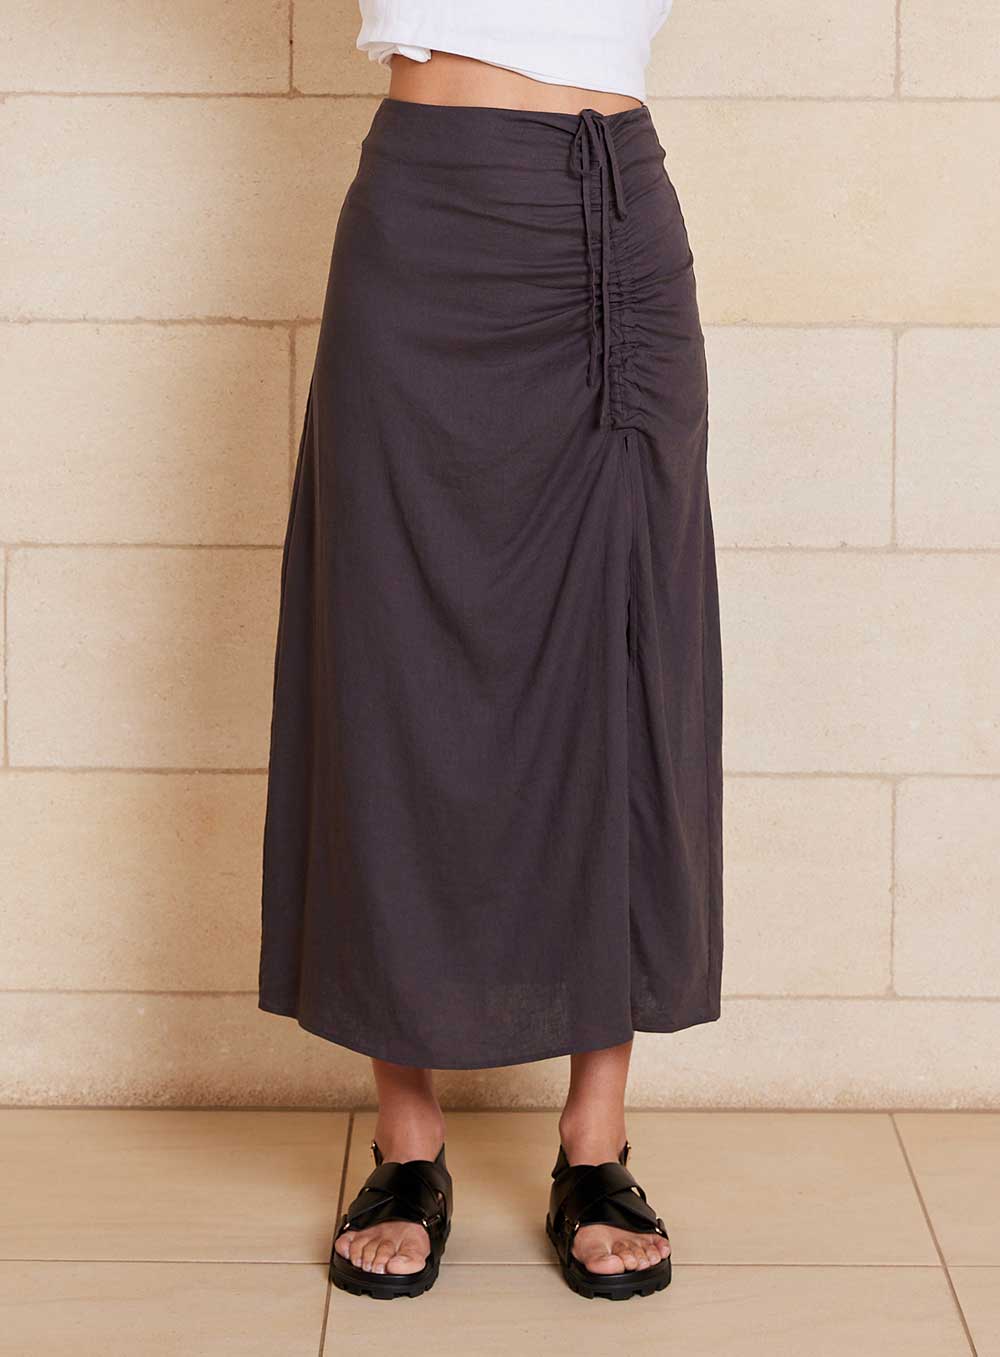 The Lily Skirt in charcoal features a ruched split detailing that adds both shape and texture, functional ruching with tie leg splits and invisible zip back seam.